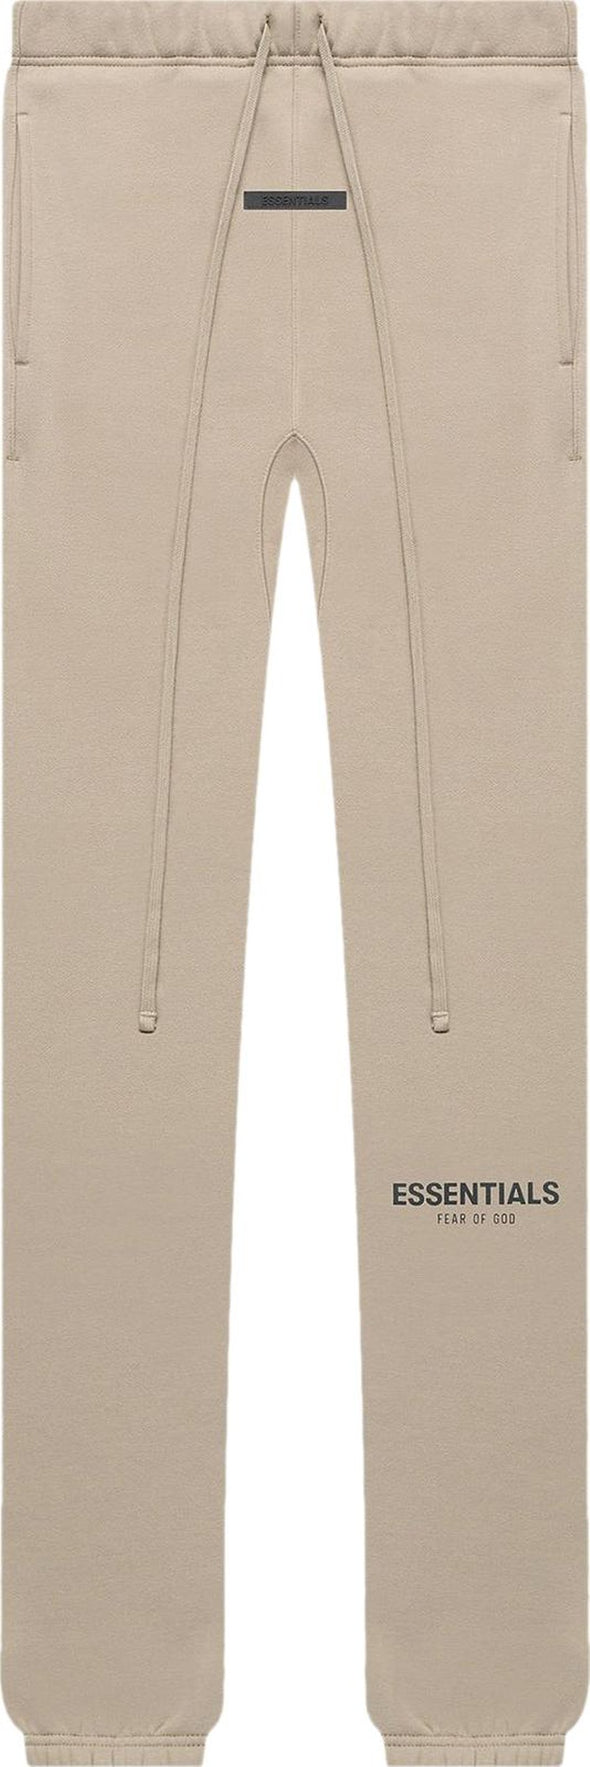 FEAR OF GOD ESSENTIALS "Core Collection" Sweatpants String